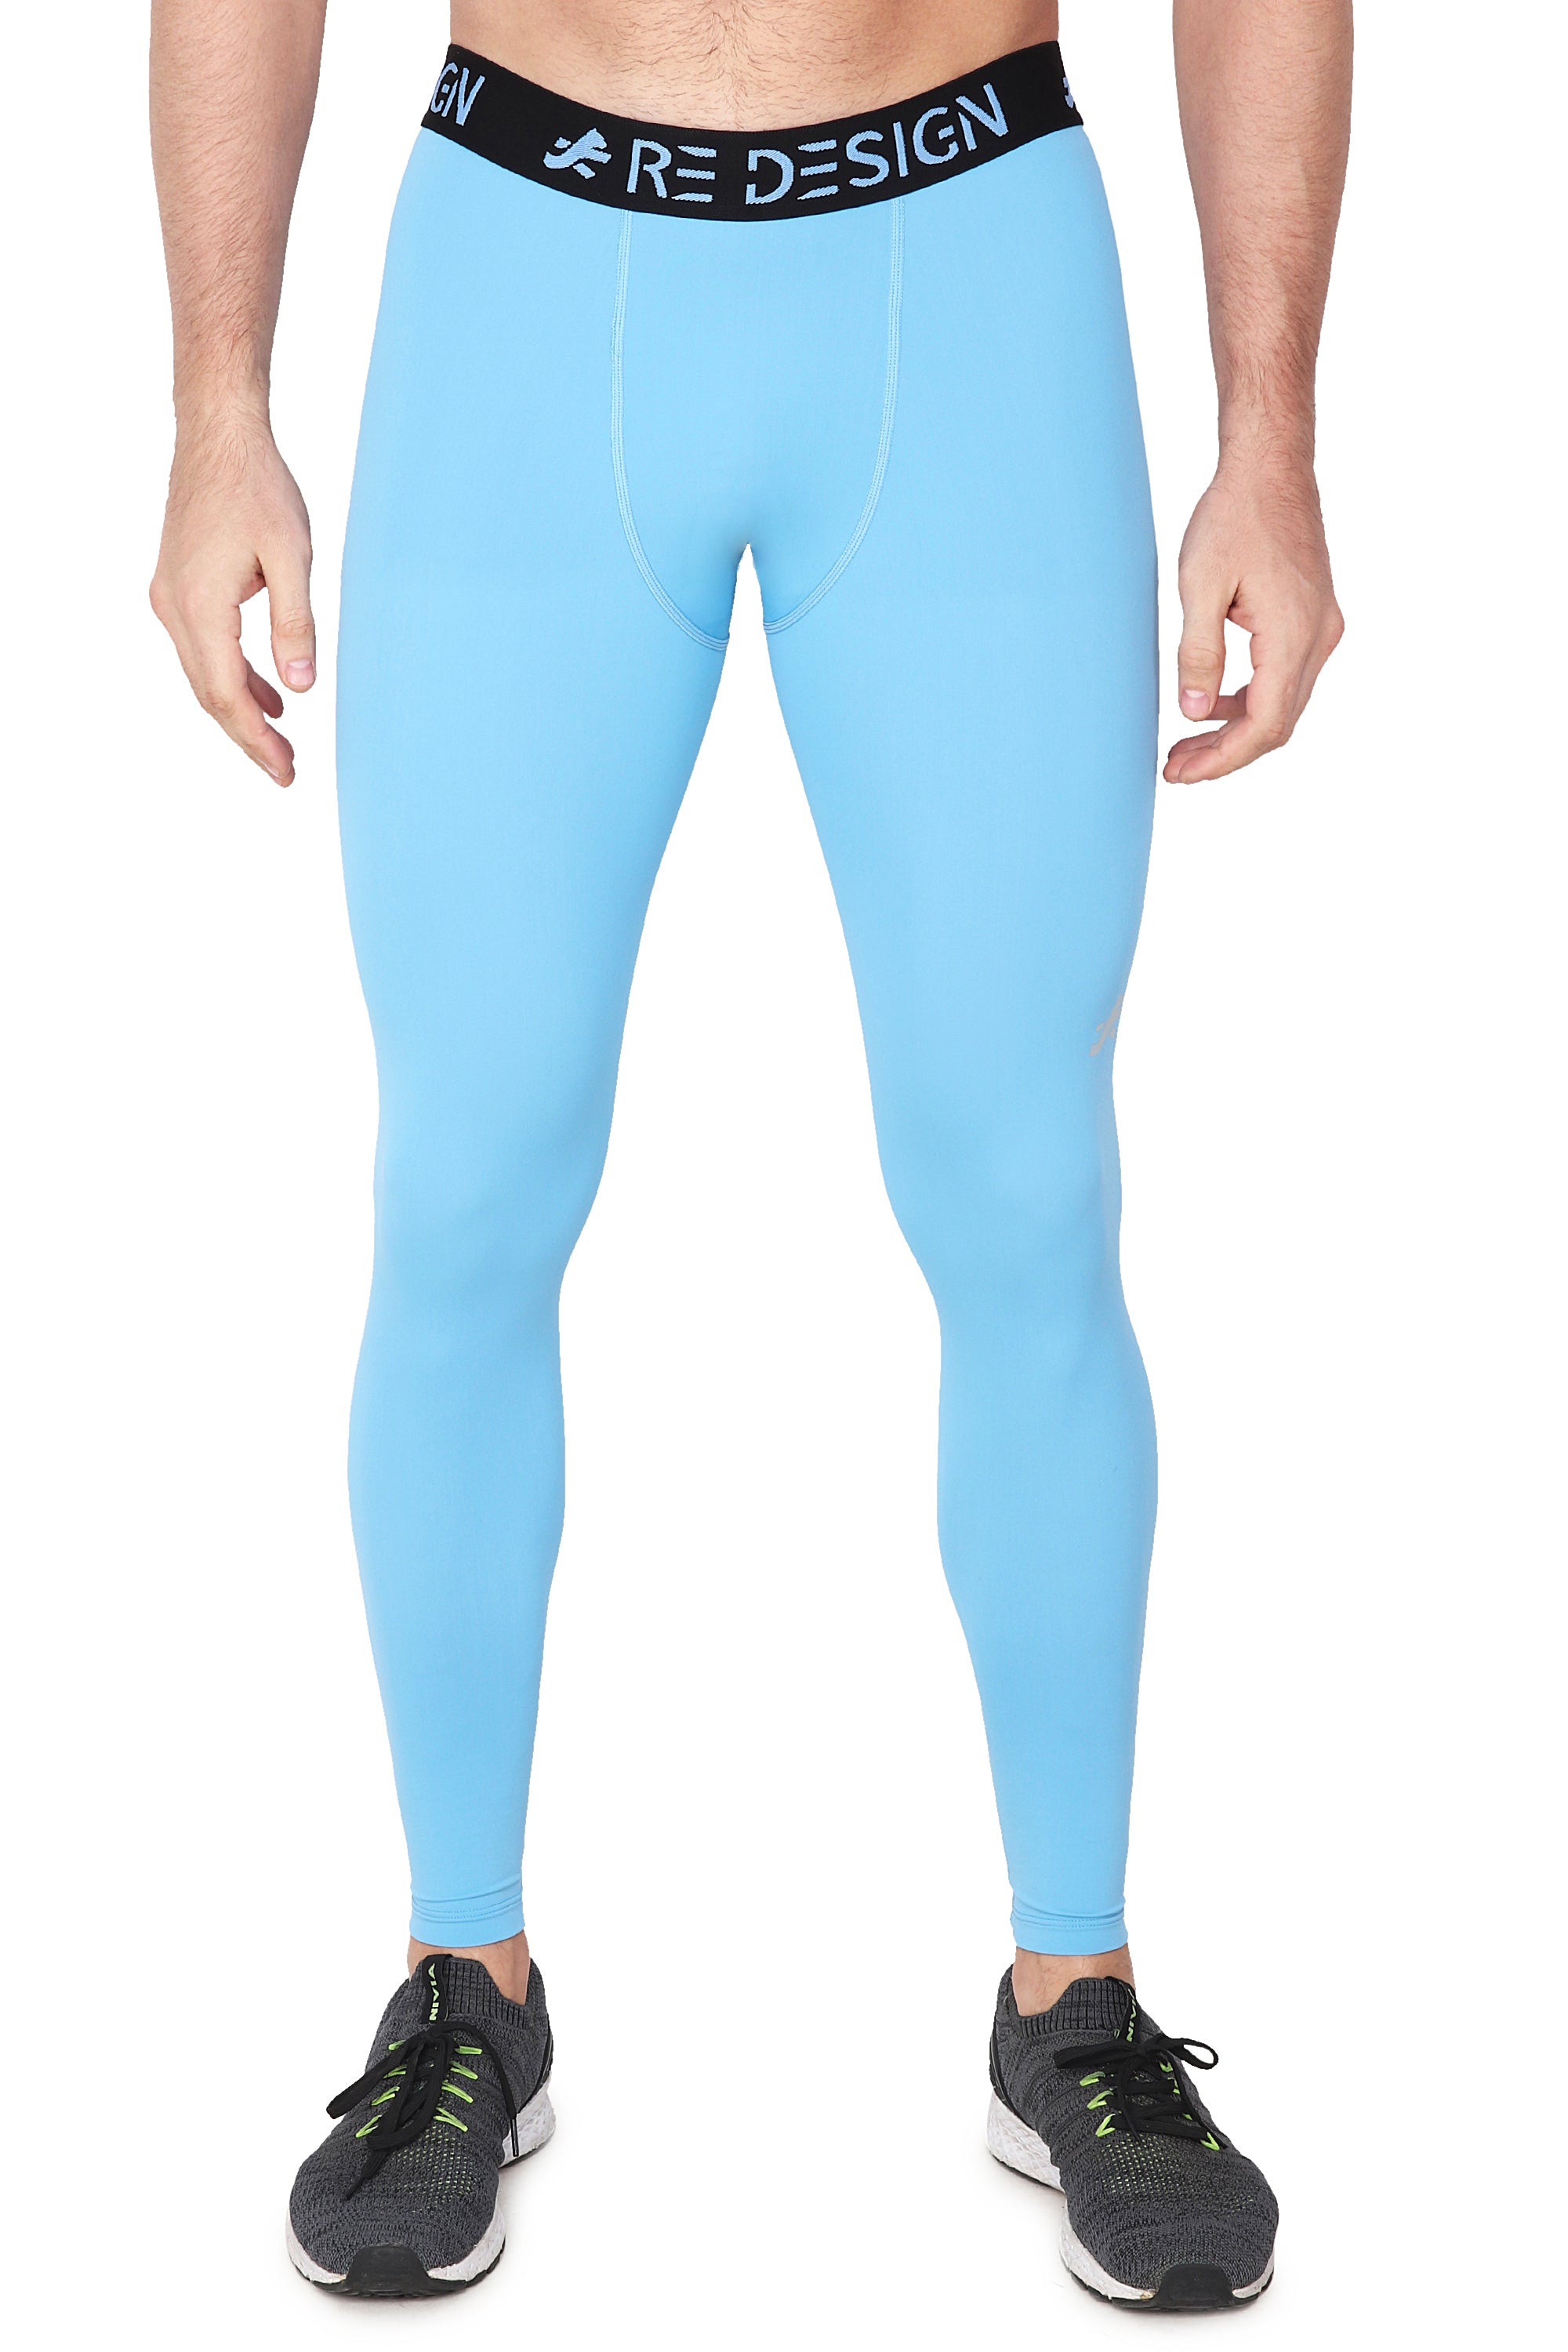 Nylon Compression Pant and Full Tights For Men (Sky Blue)